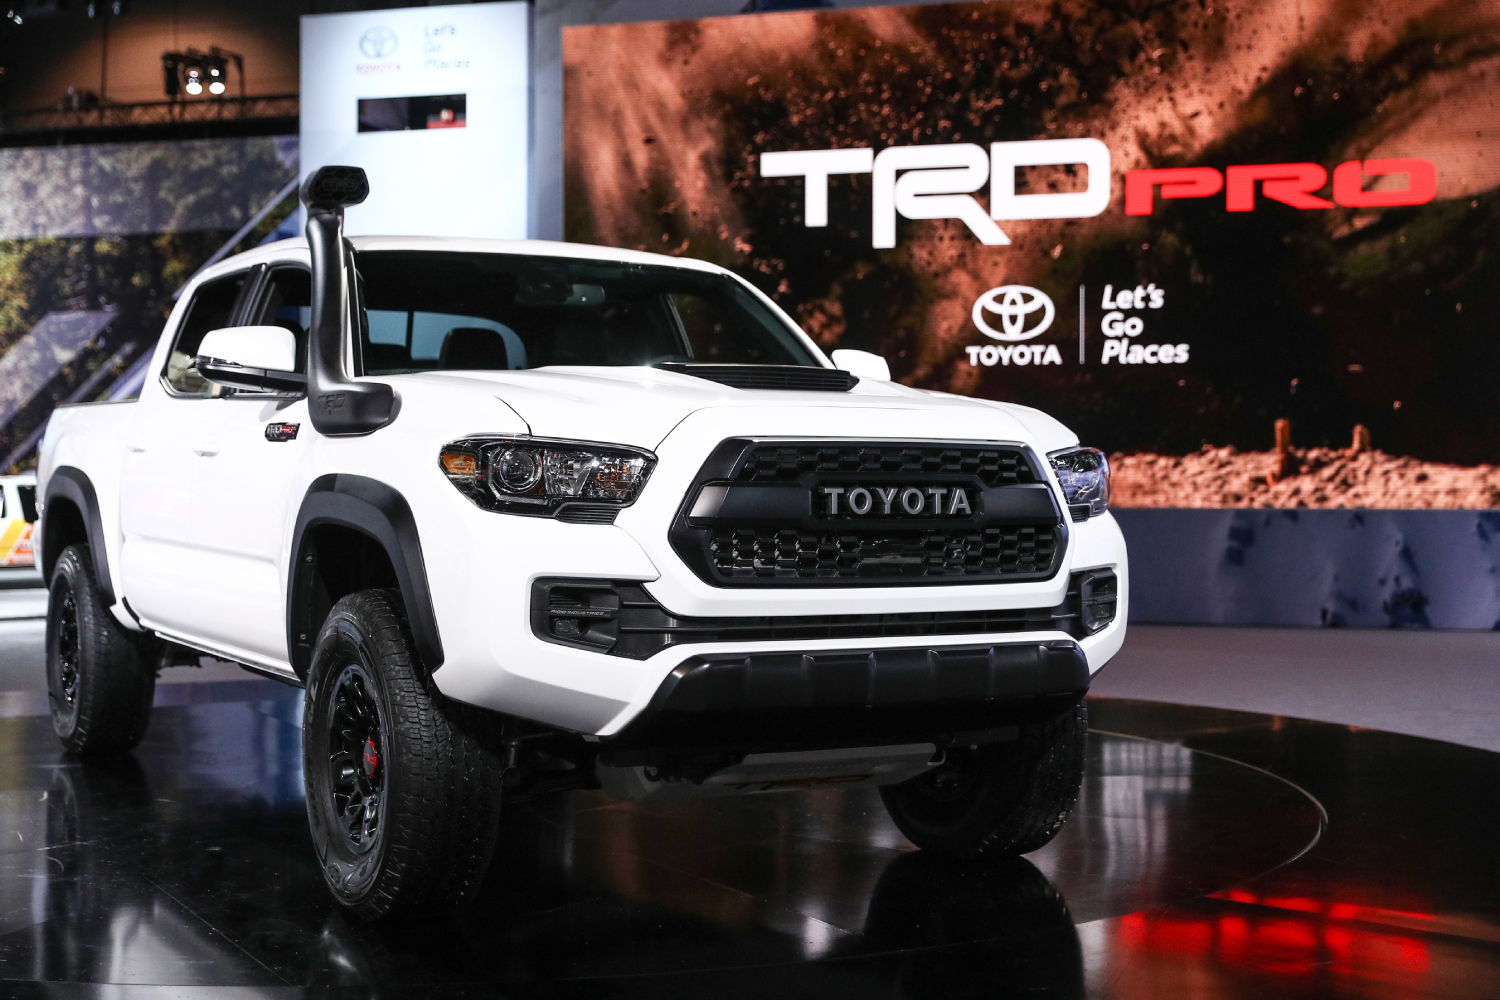 The Toyota TRD products explained